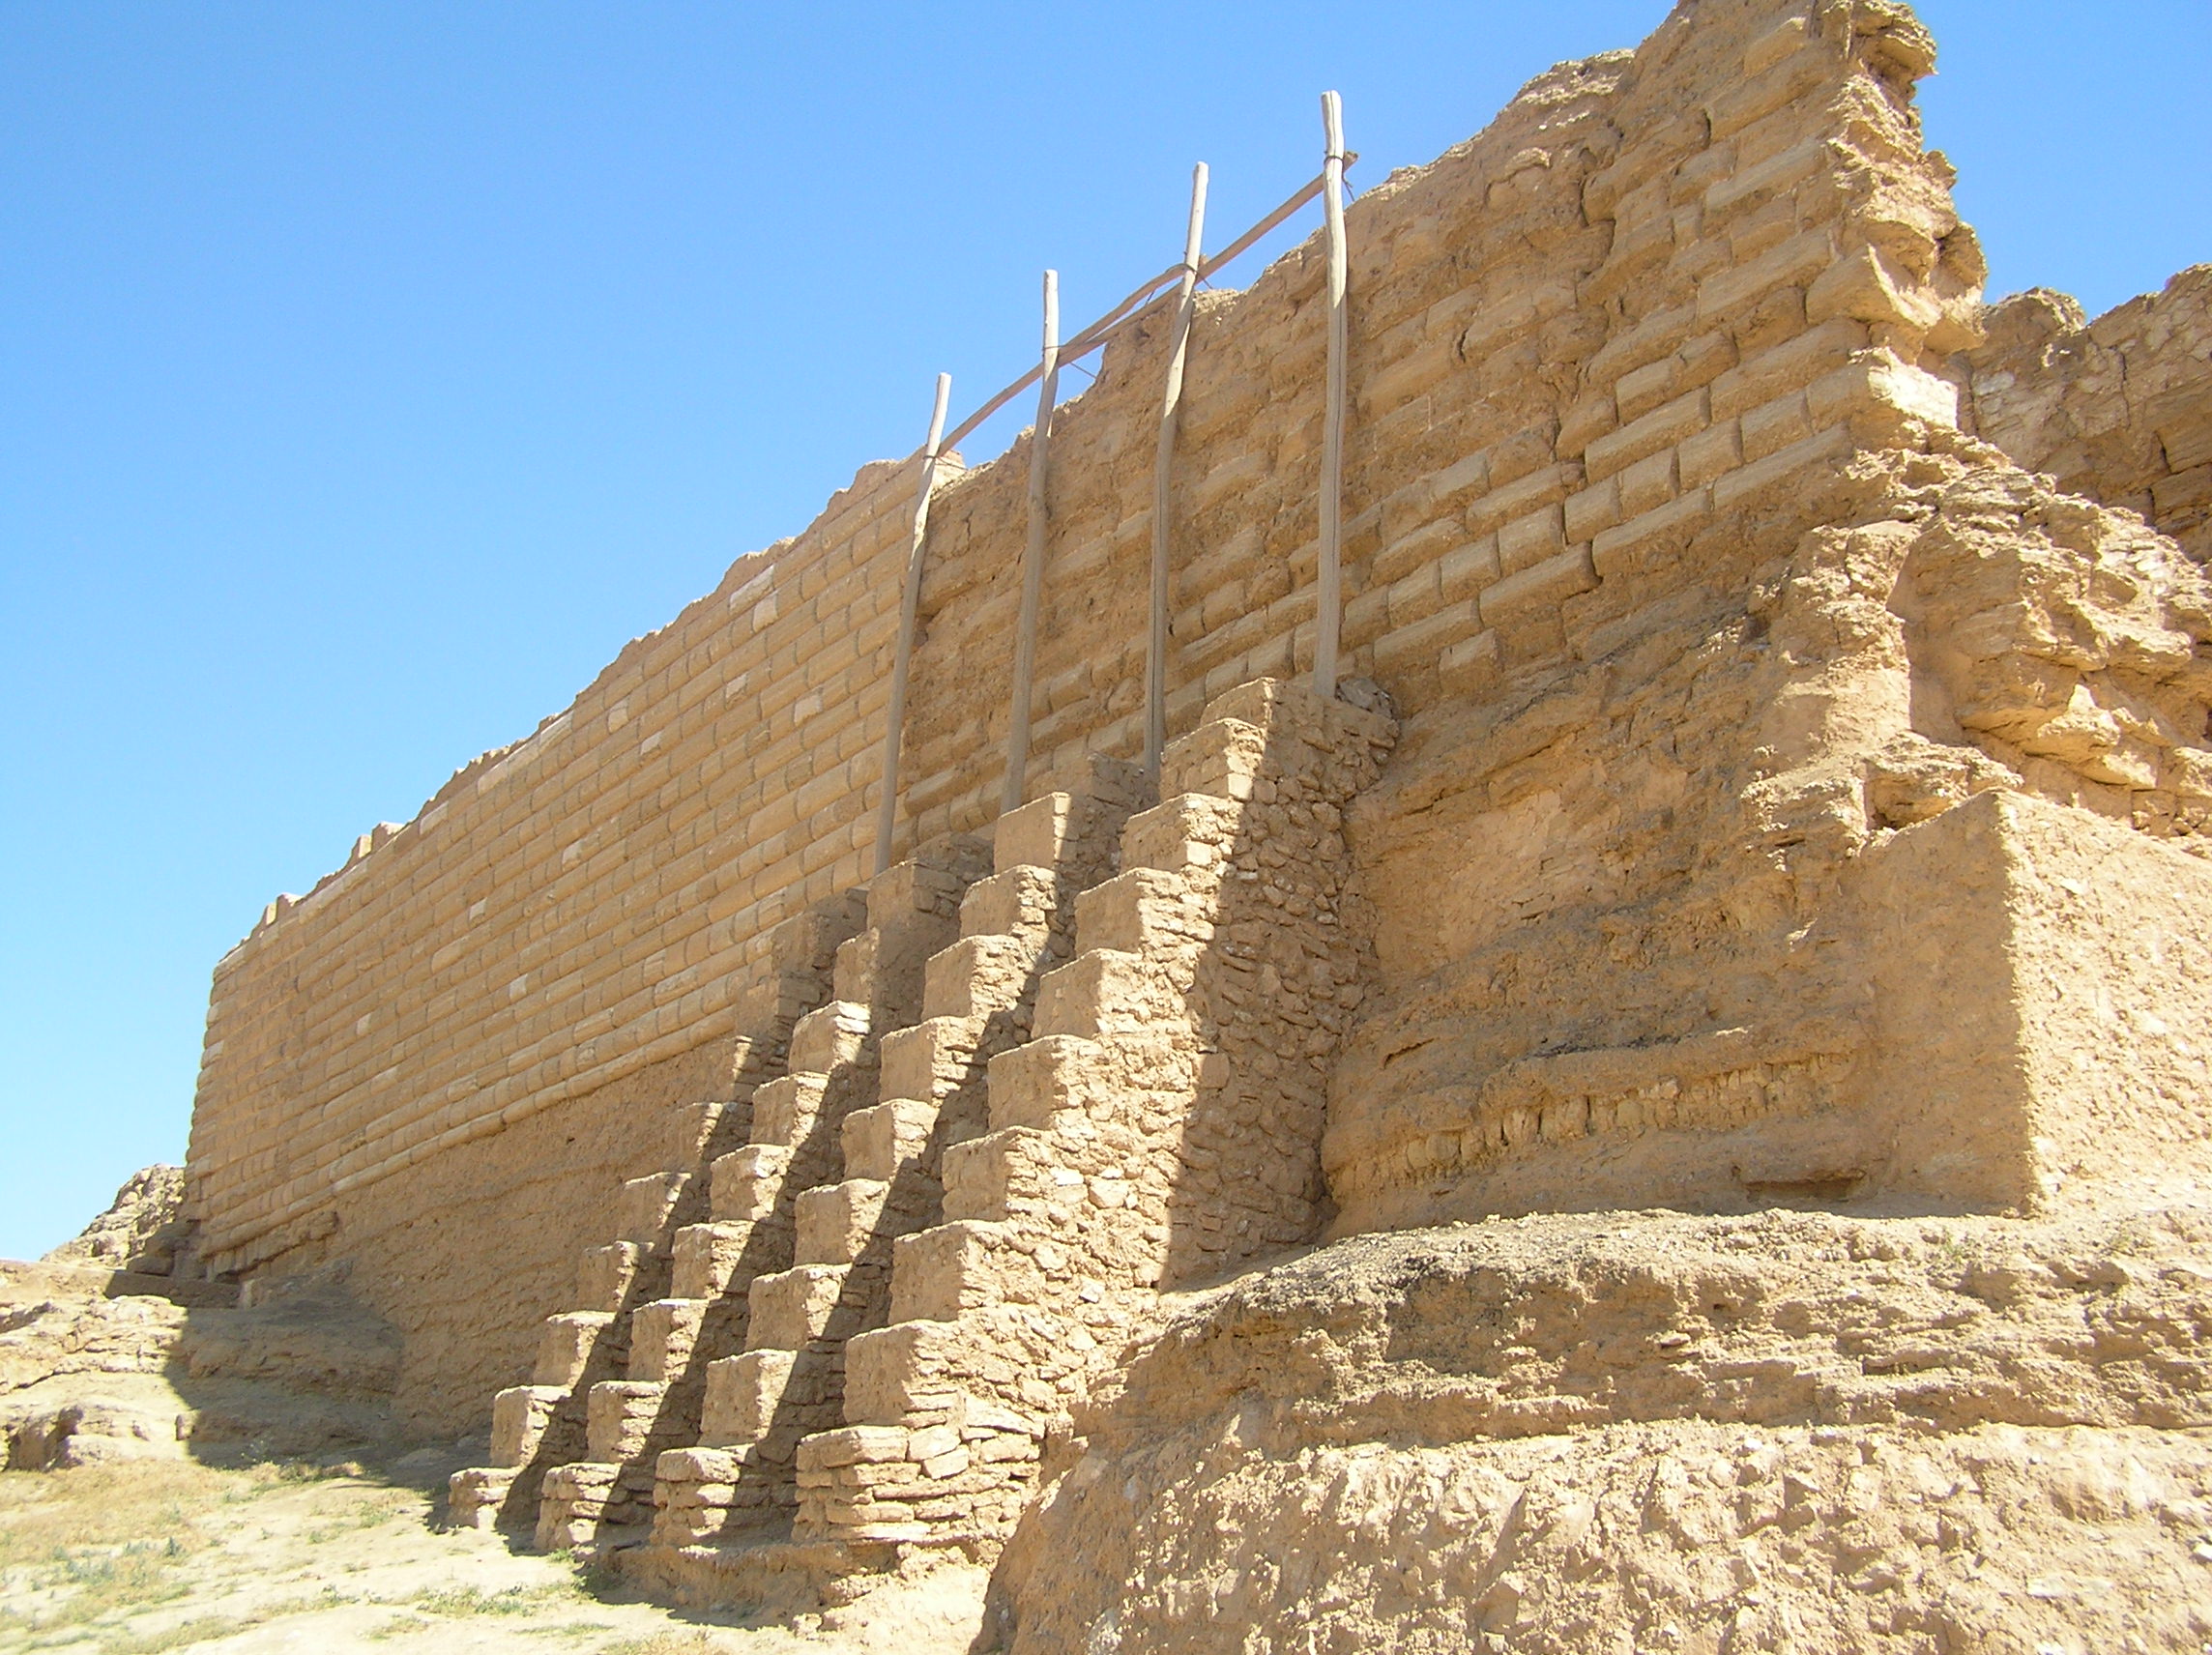 A photograph of the ancient wall surrounding the city of Dura-Europos